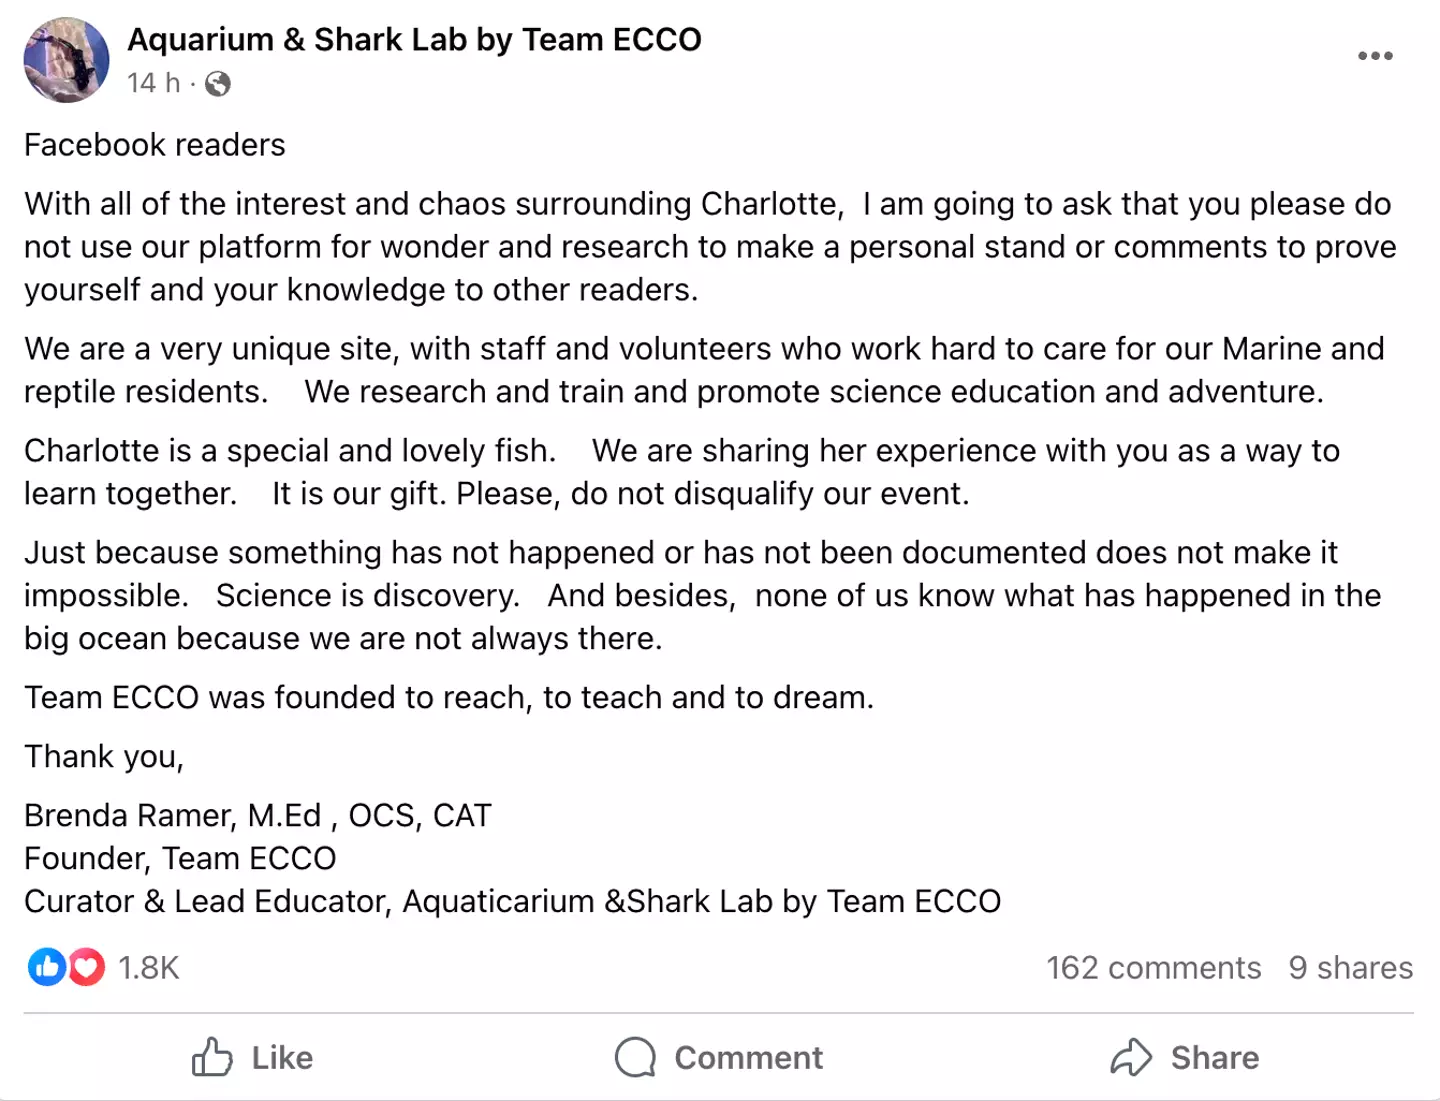 The aquarium has since issued a statement.